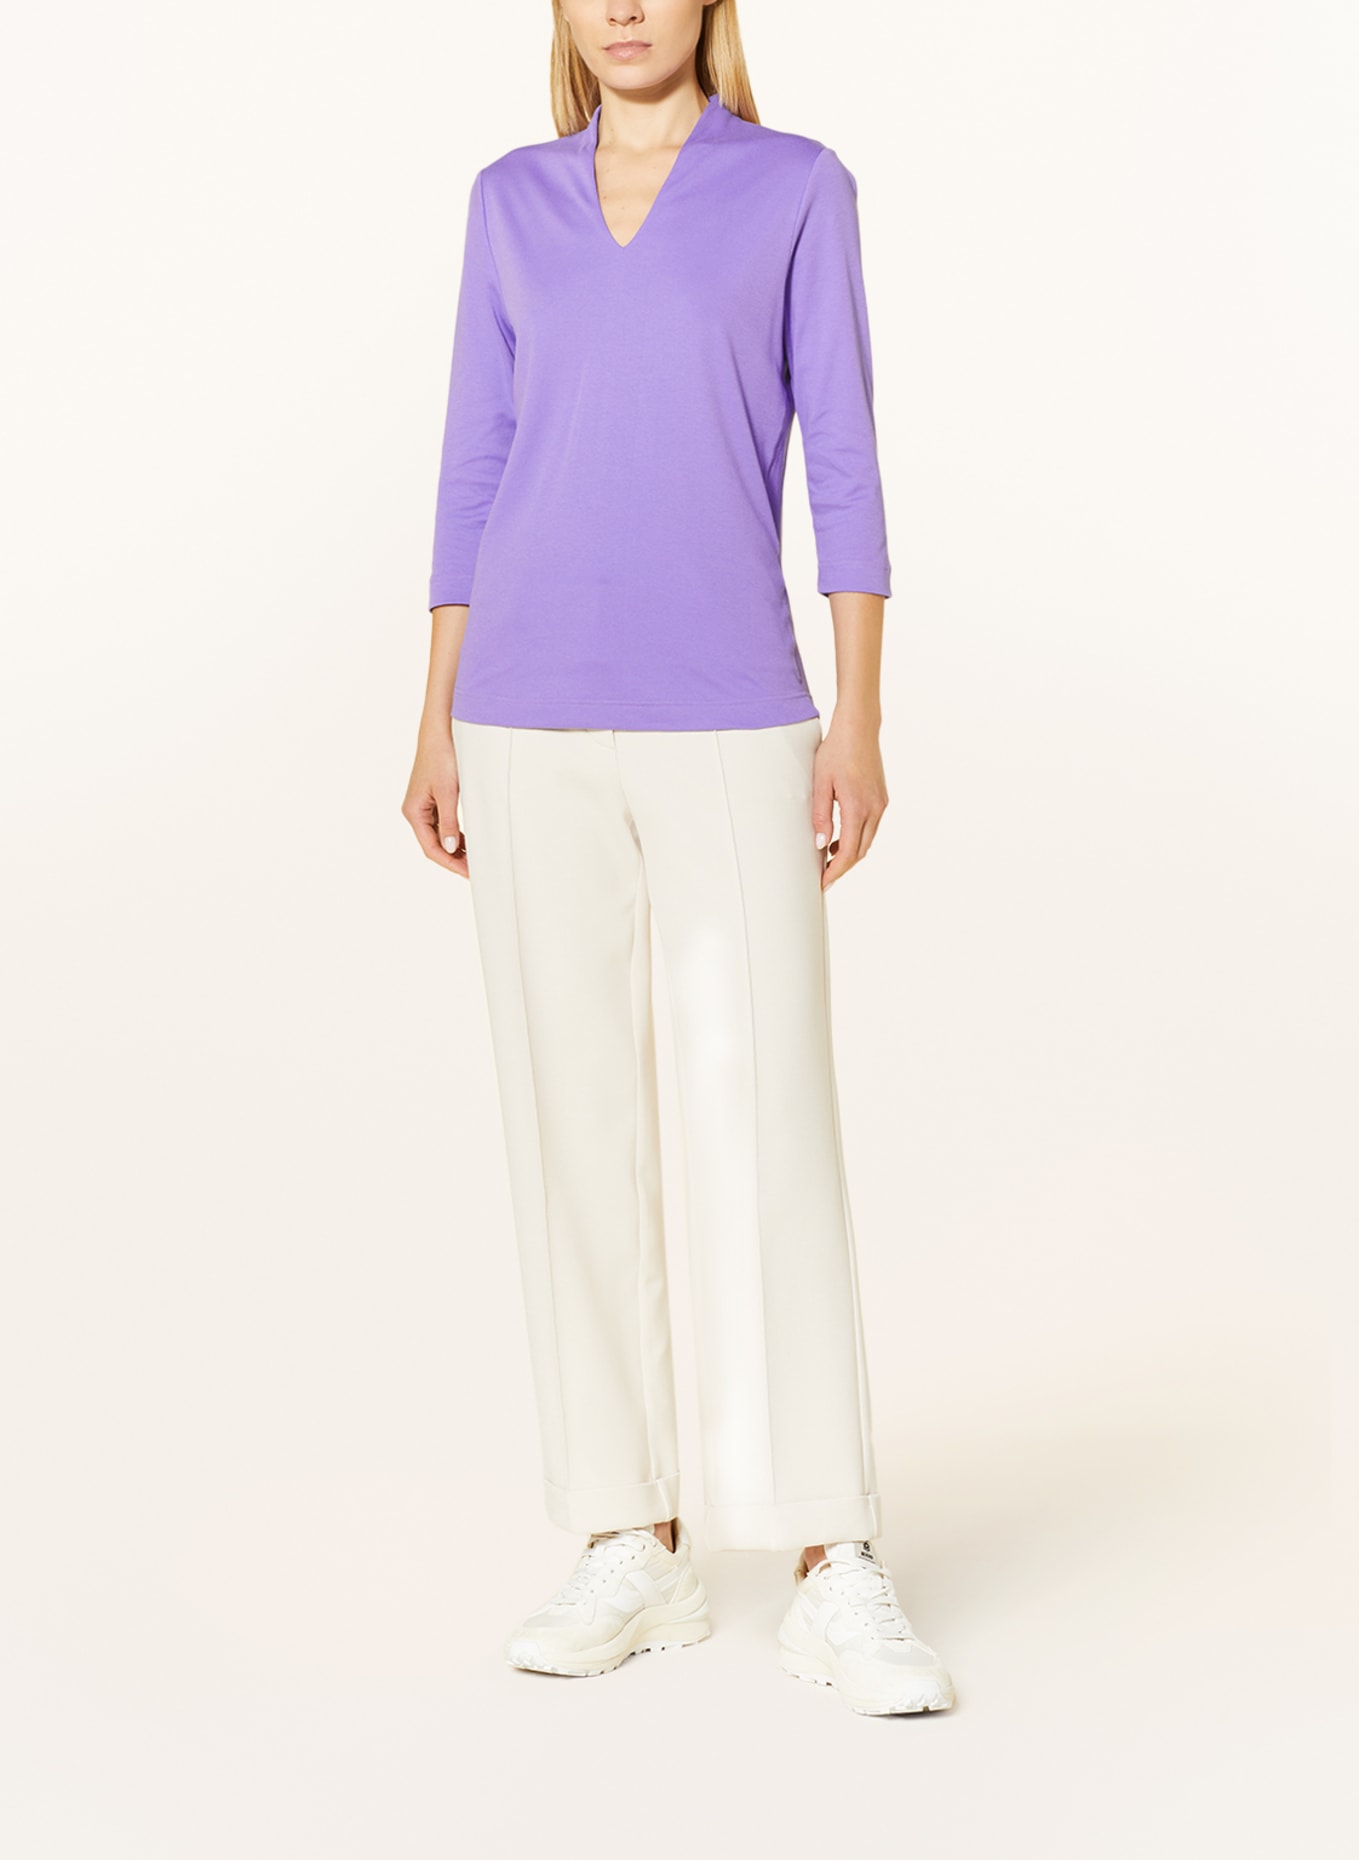 ZAÍDA Shirt with 3/4 sleeves, Color: PURPLE (Image 2)